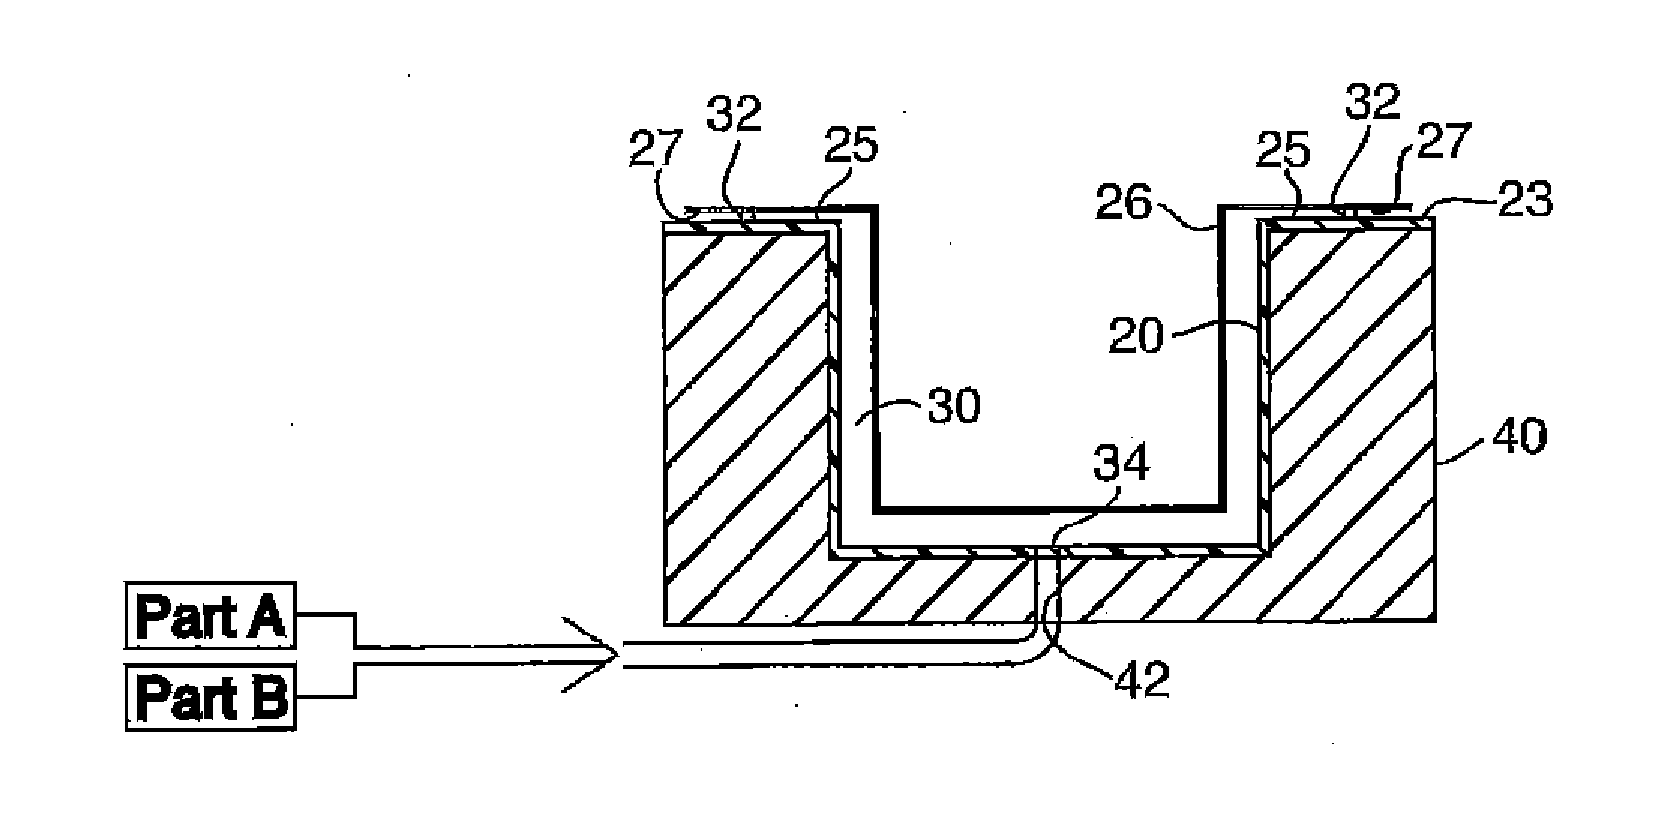 Method of manufacturing a composite insert